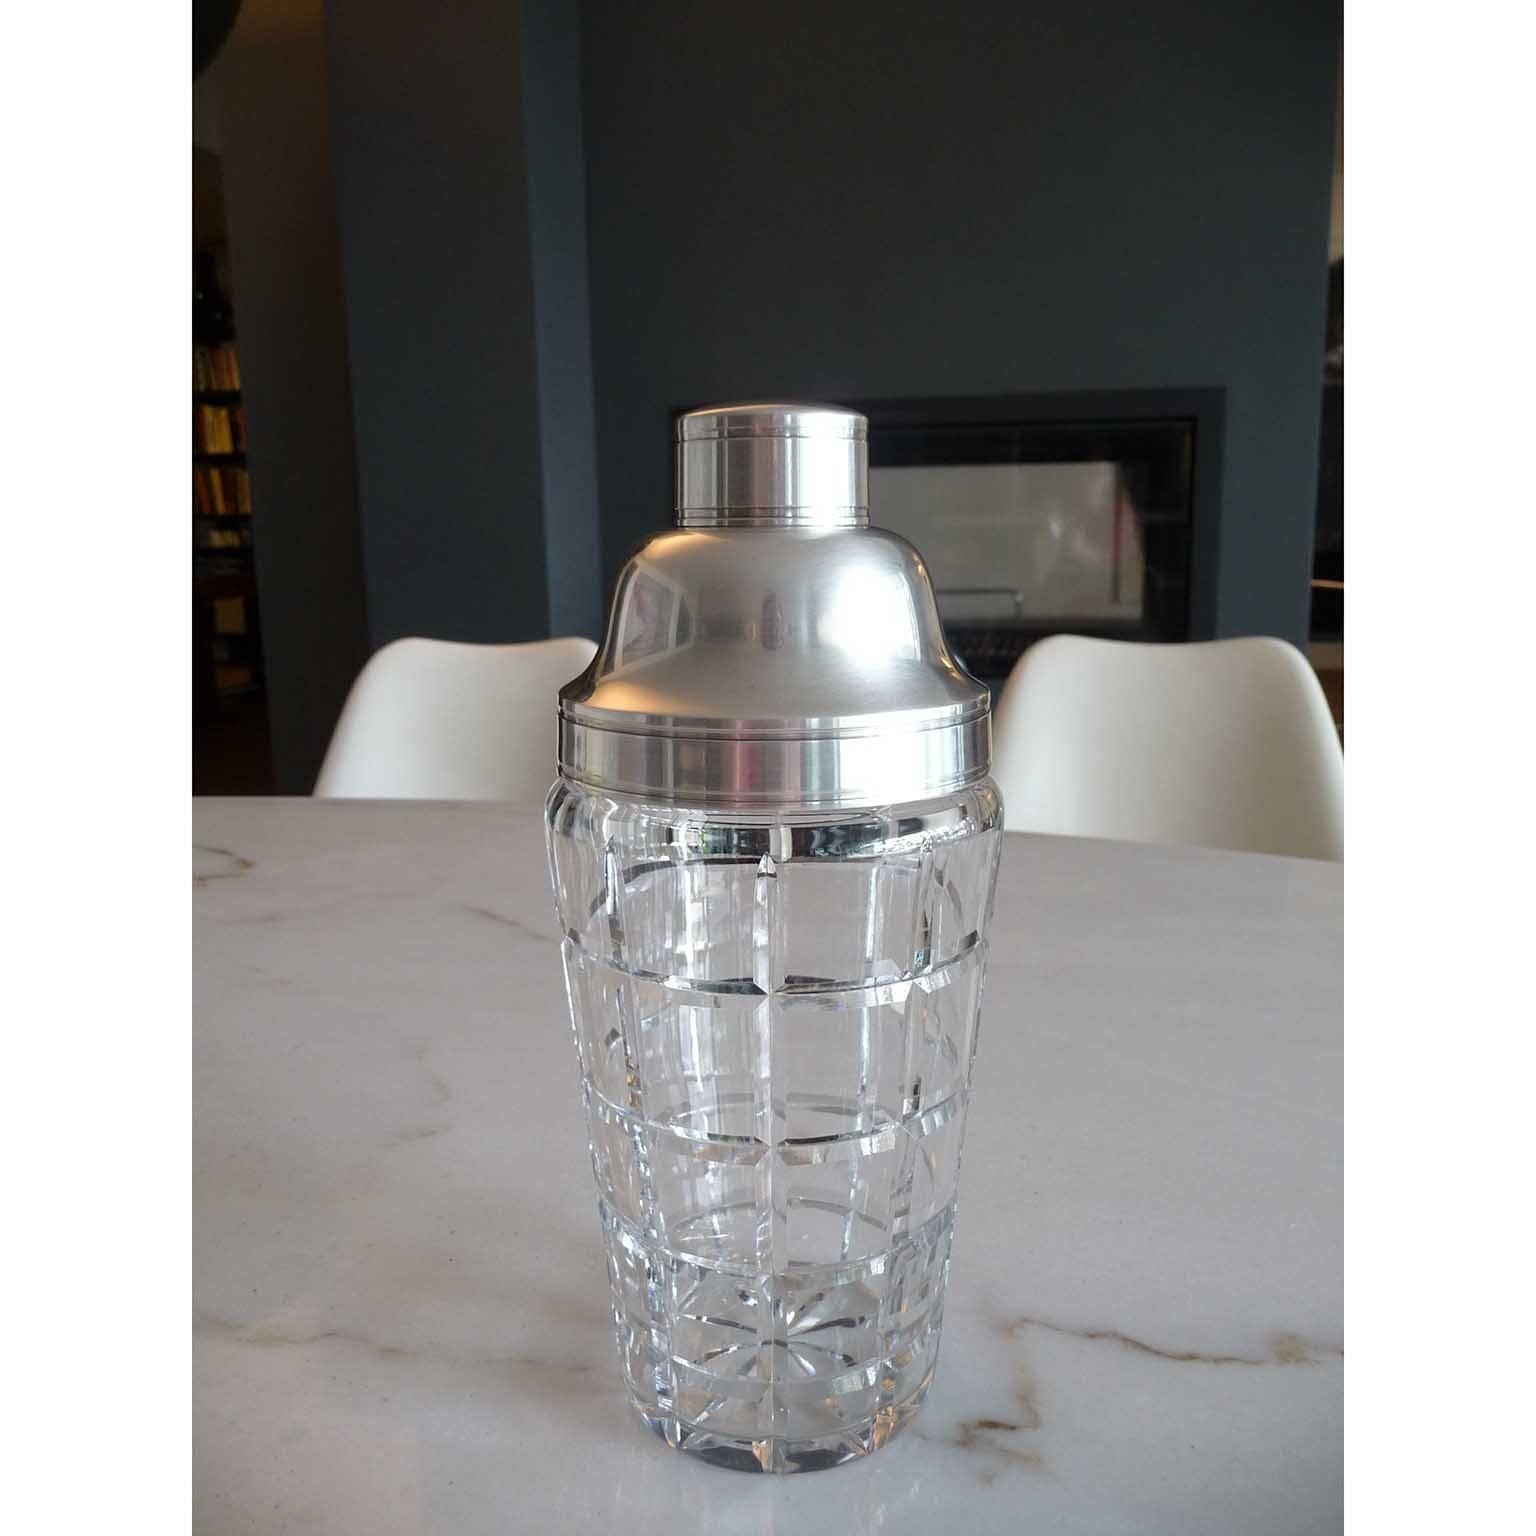 French Art Deco Cocktail Shaker by Saglier Freres